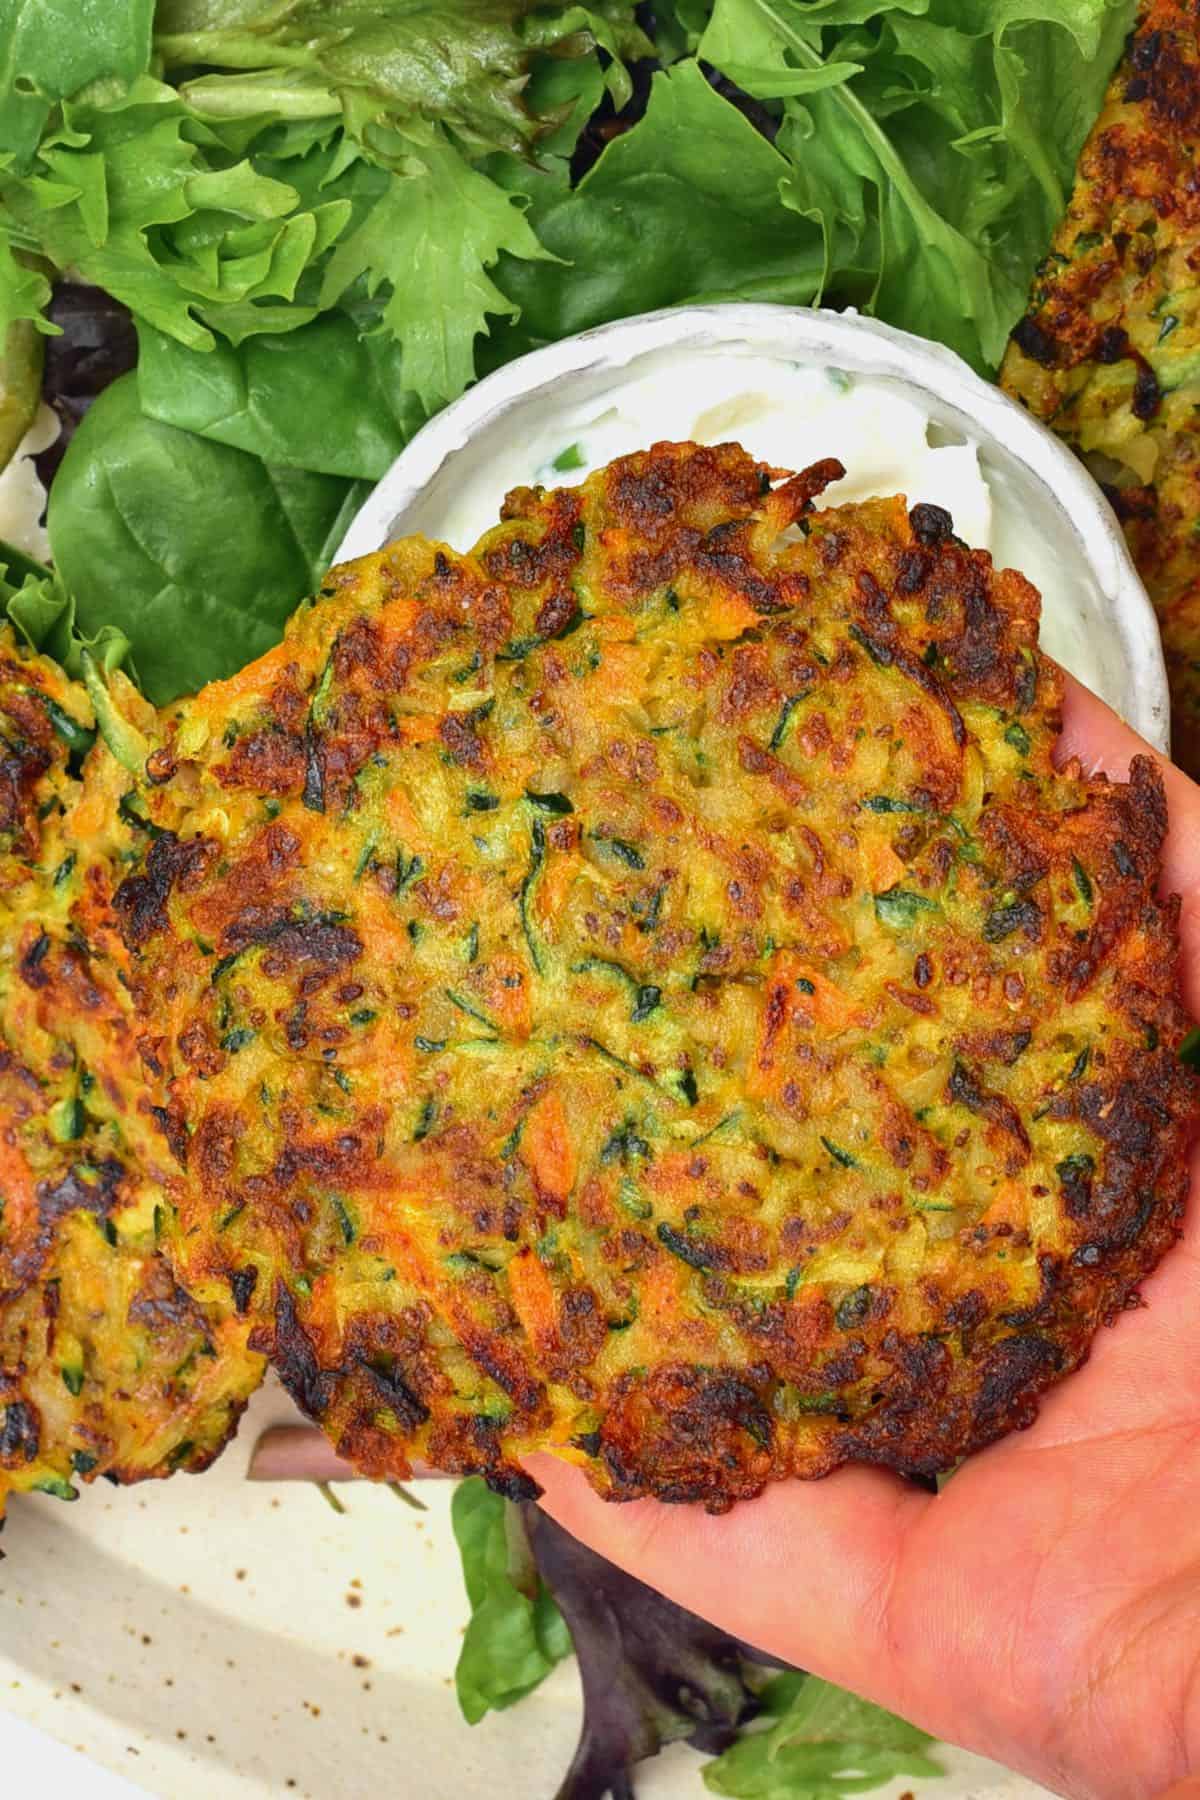 Veggie fritter and salad